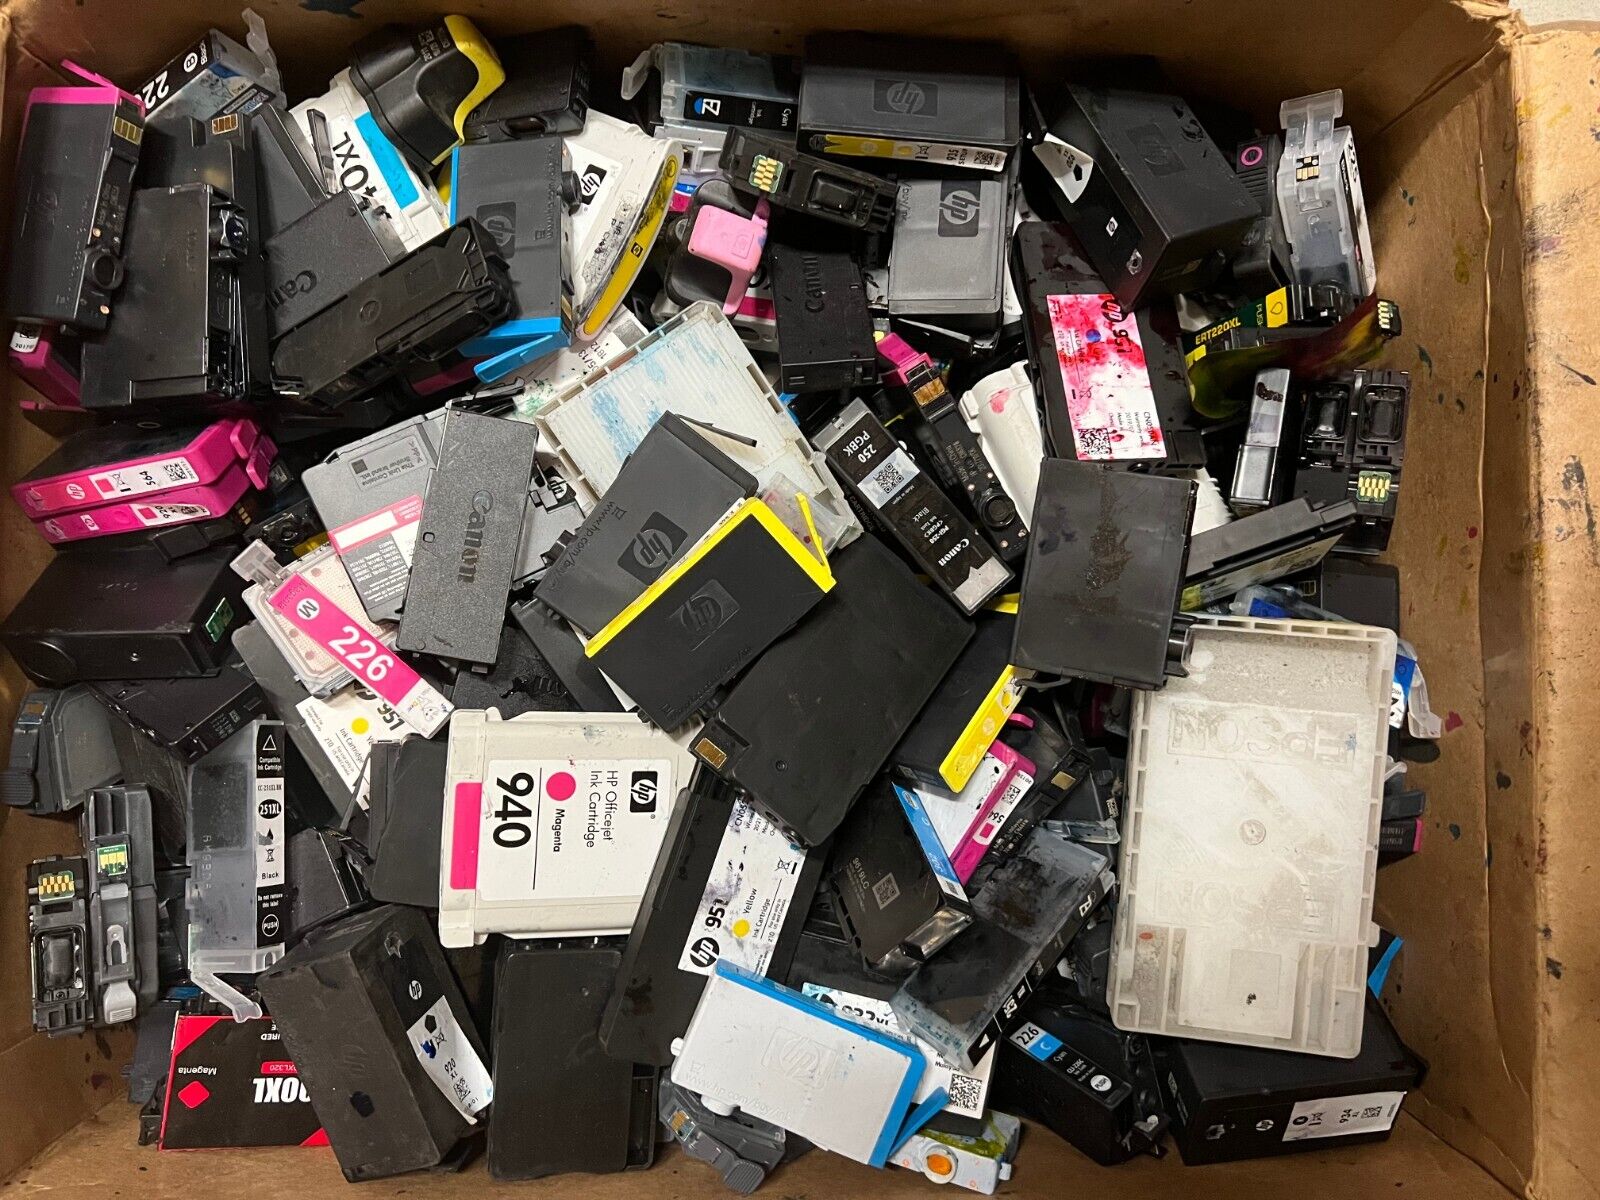 MIX LOT OF 150 EMPTY INK CARTRIDGES FOR $300 STAPLES or OFFICE MAX REWARDS